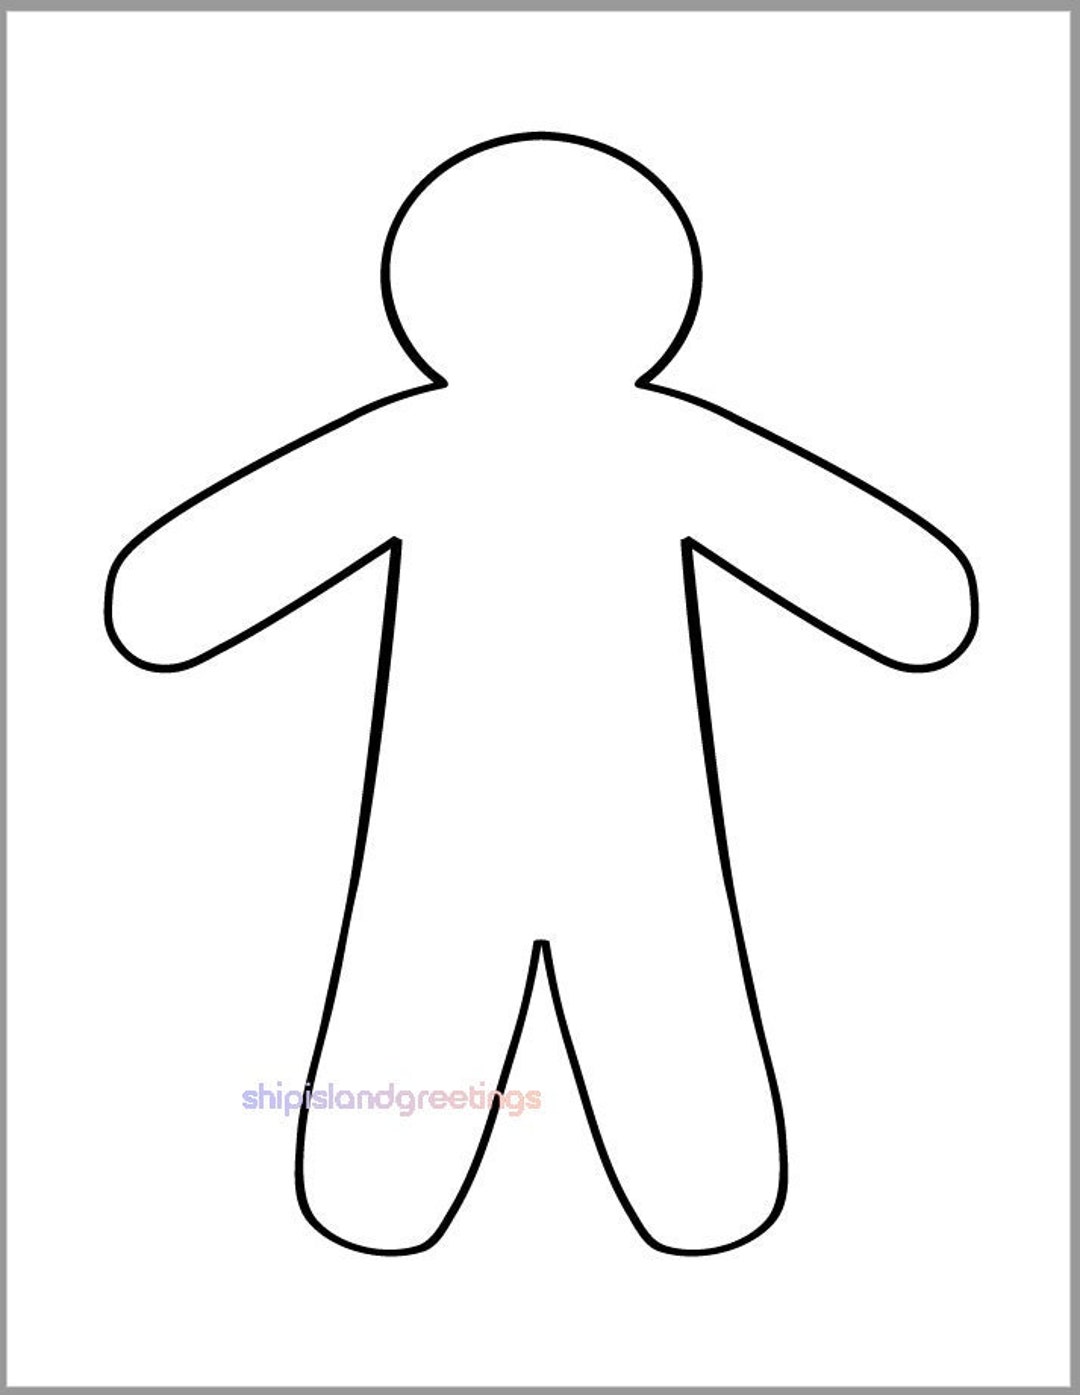 Inch gingerbread man template